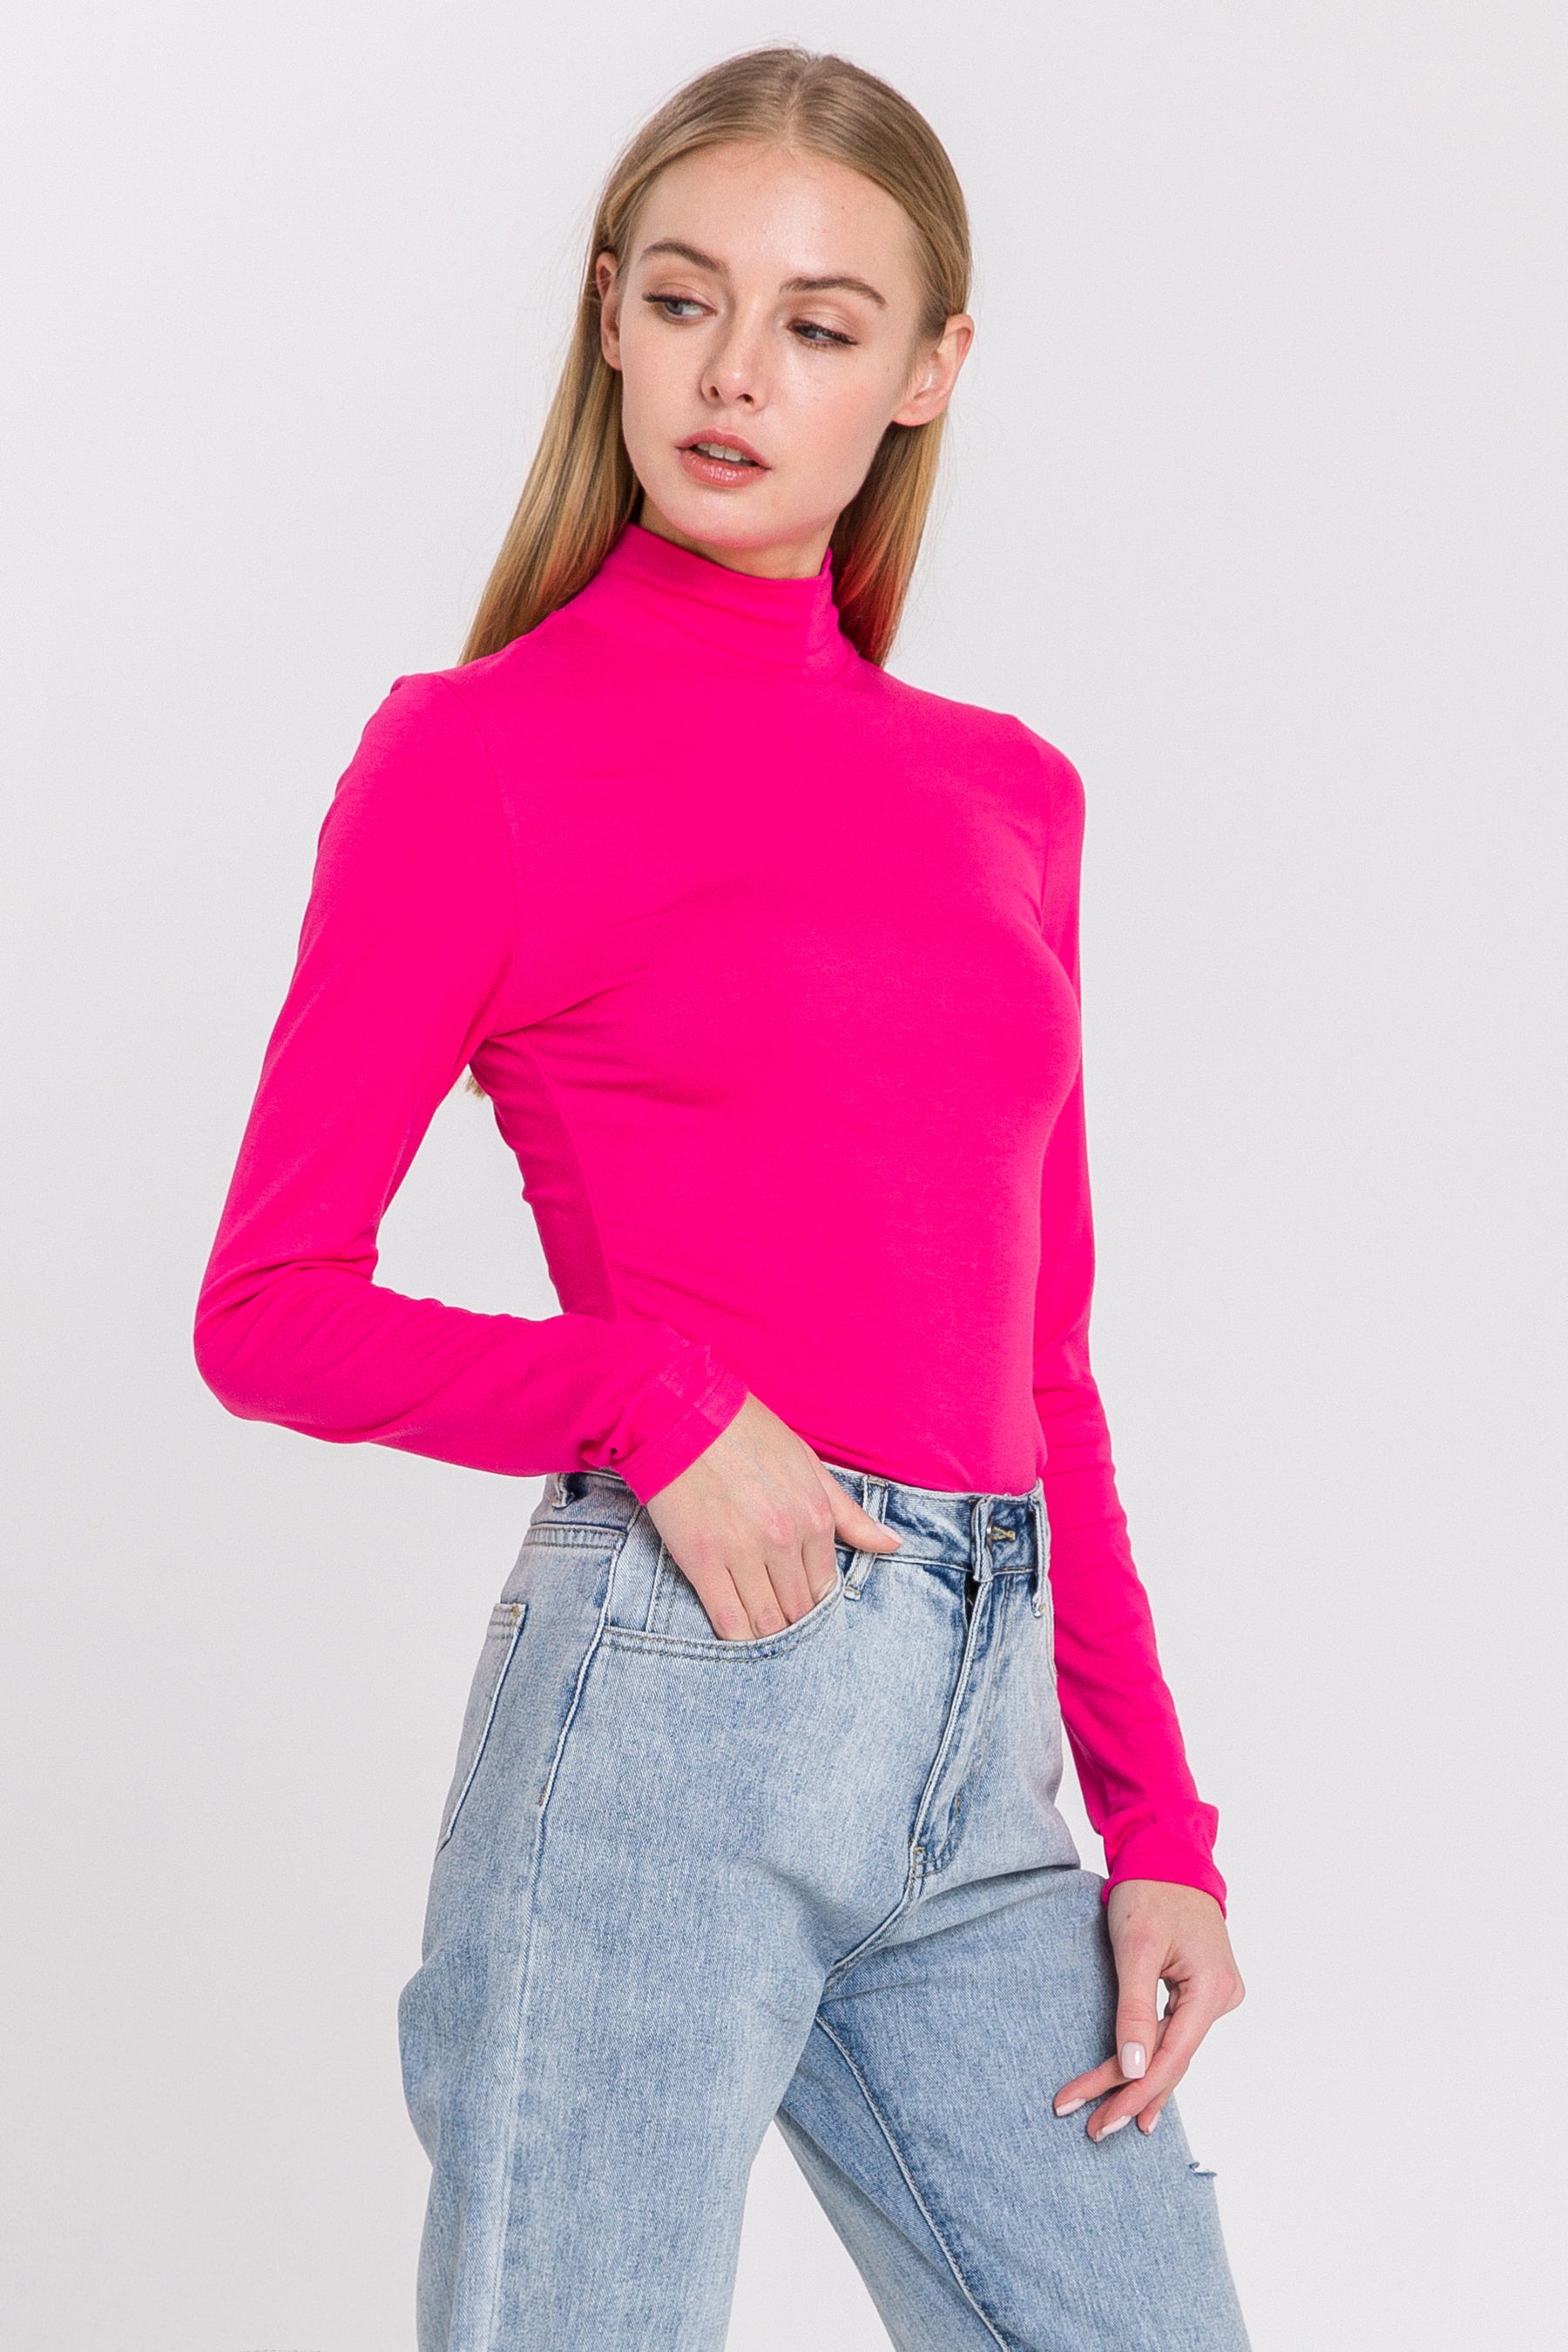 ENDLESS ROSE - Turtle Neck Top - TOPS available at Objectrare